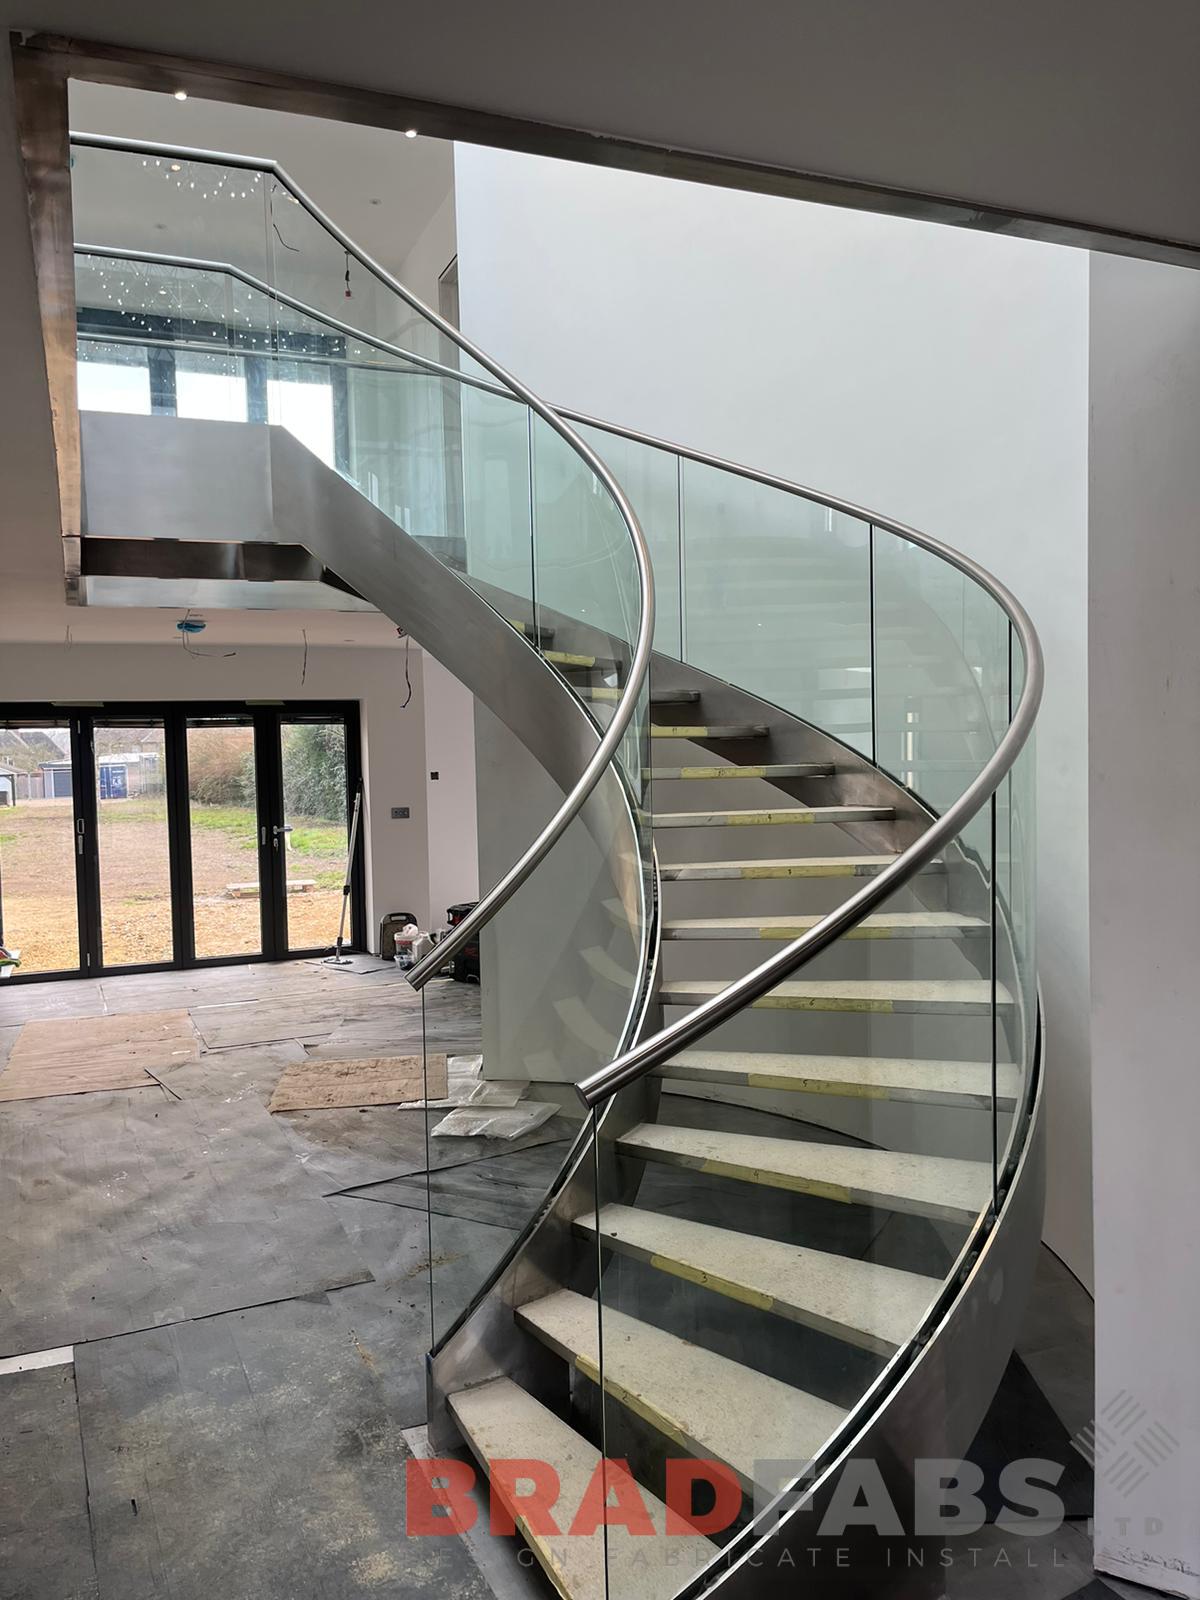 Helix staircase with stainless steel stringers by Bradfabs Ltd 